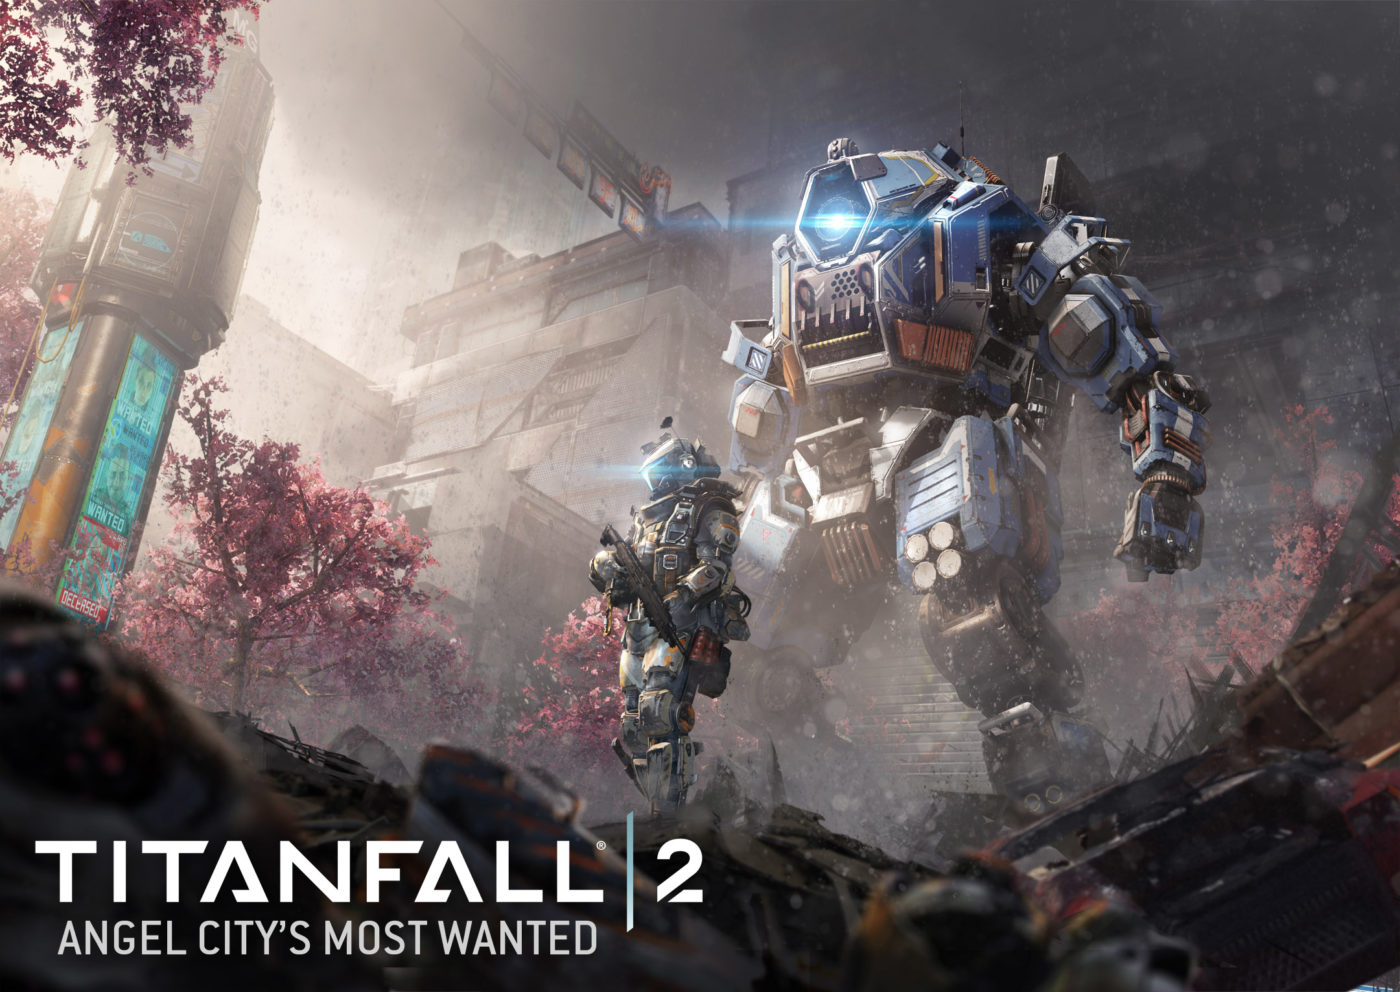 10 'Titanfall 2' tips for those who struggle with multiplayer